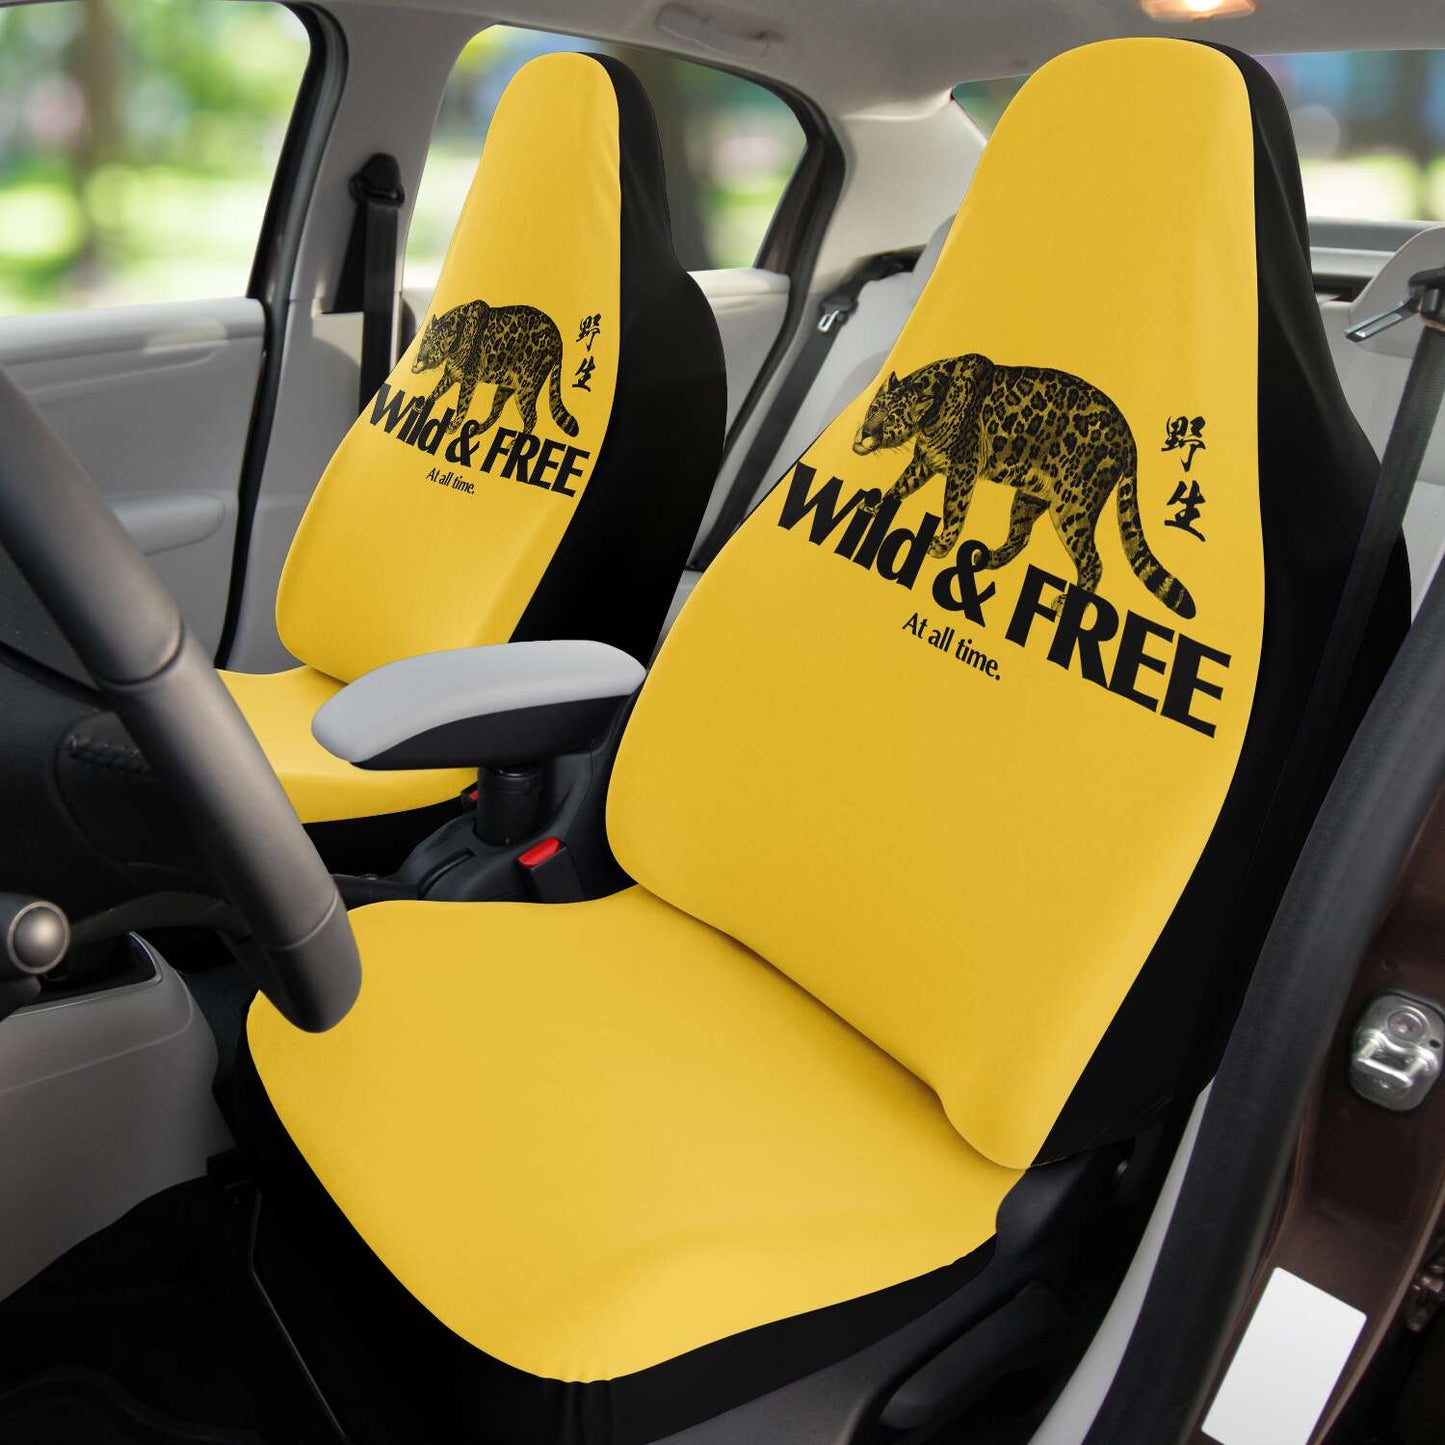 Wild & Free, at all time. 🐯 Panther Seat Covers Yellow